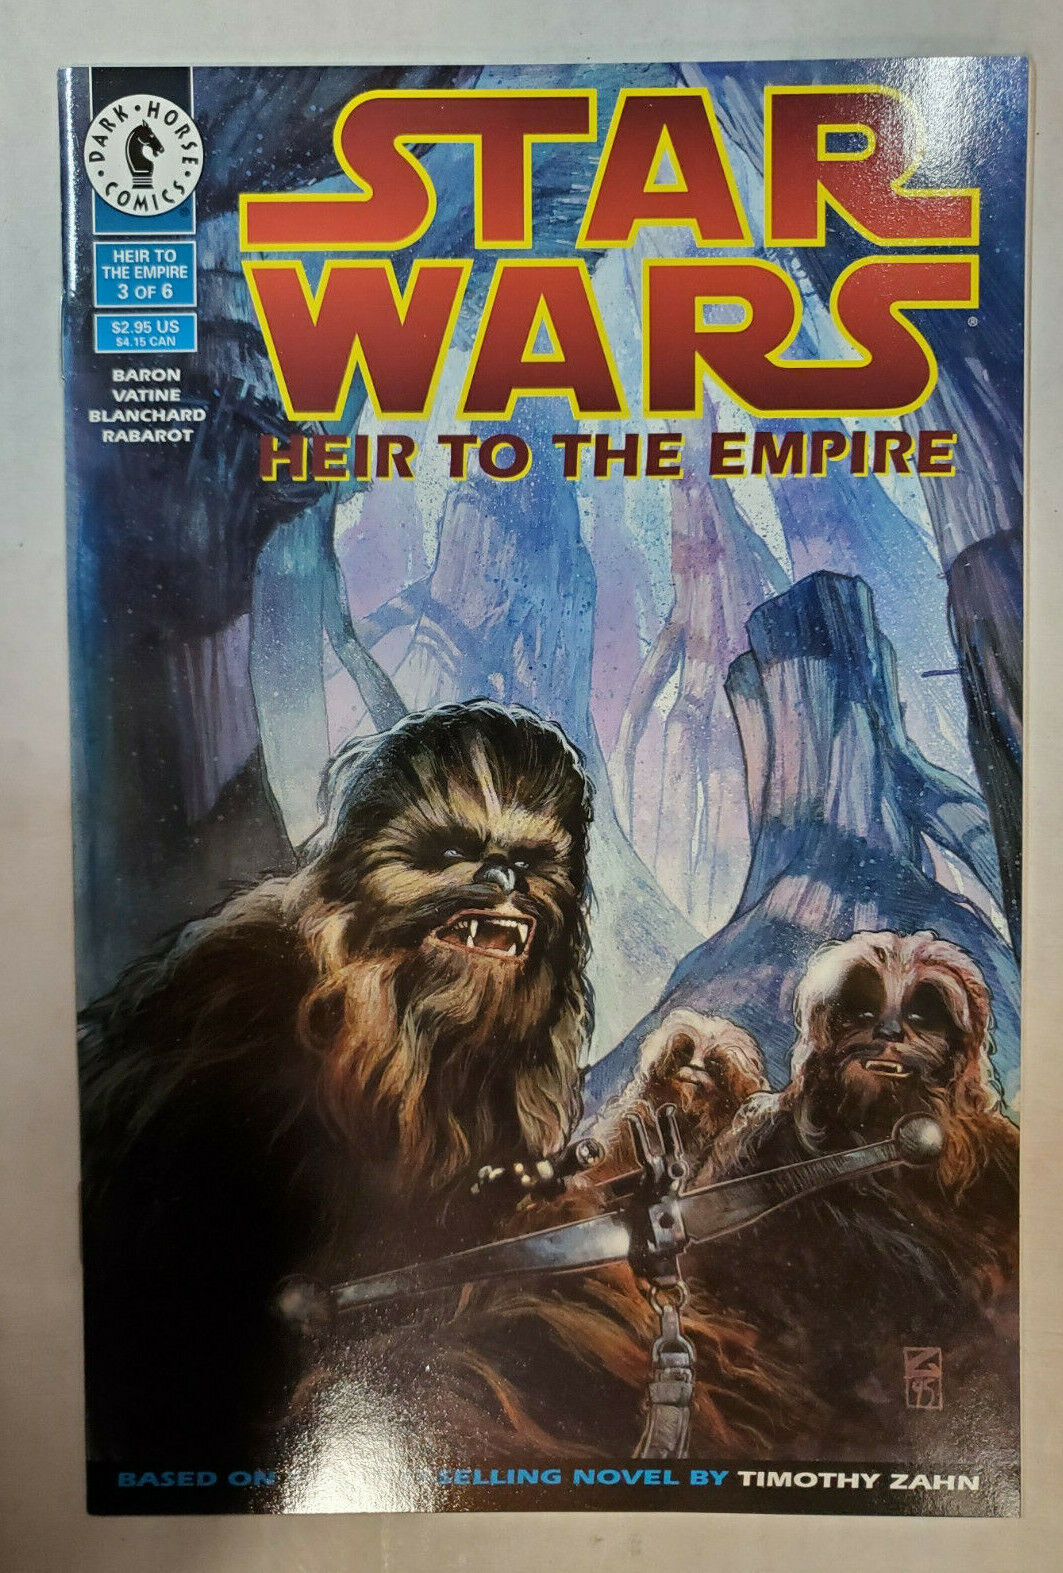 Star Wars: Heir to the Empire #3